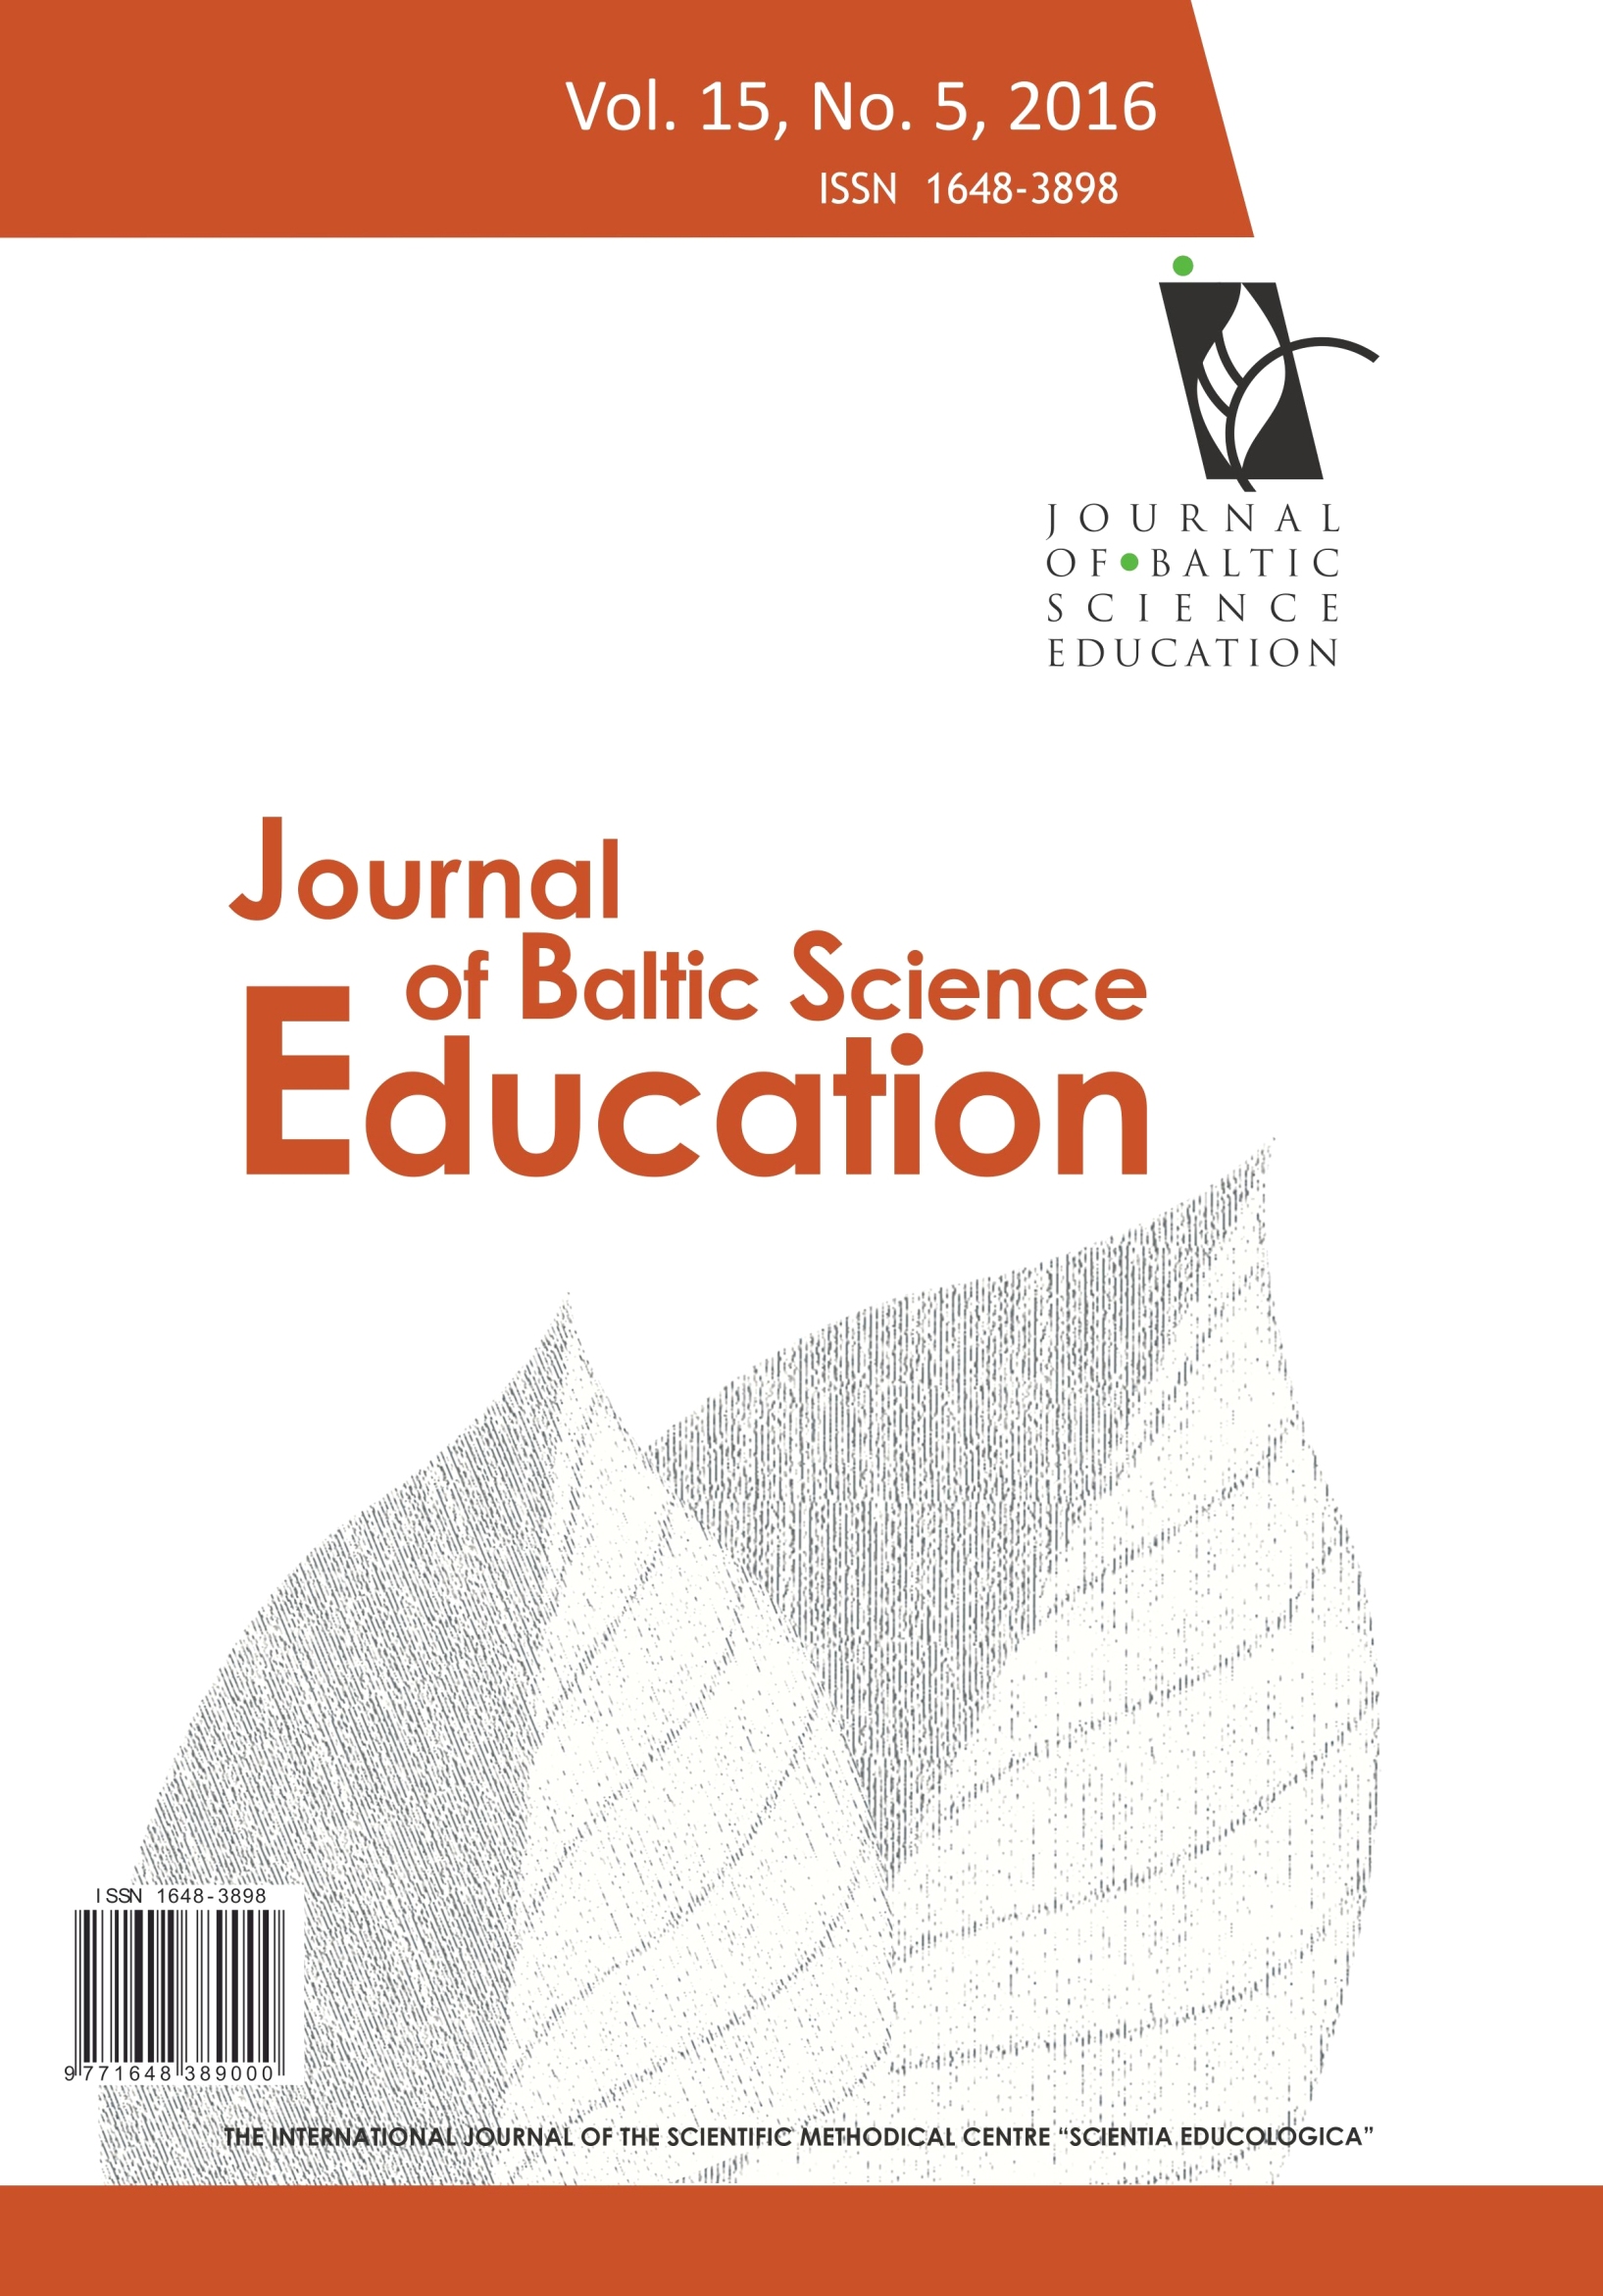 PRE-SERVICE TEACHERS’ ATTITUDES TOWARD SOCIO-SCIENTIFIC ISSUES AND THEIR VIEWS ABOUT NUCLEAR POWER PLANTS